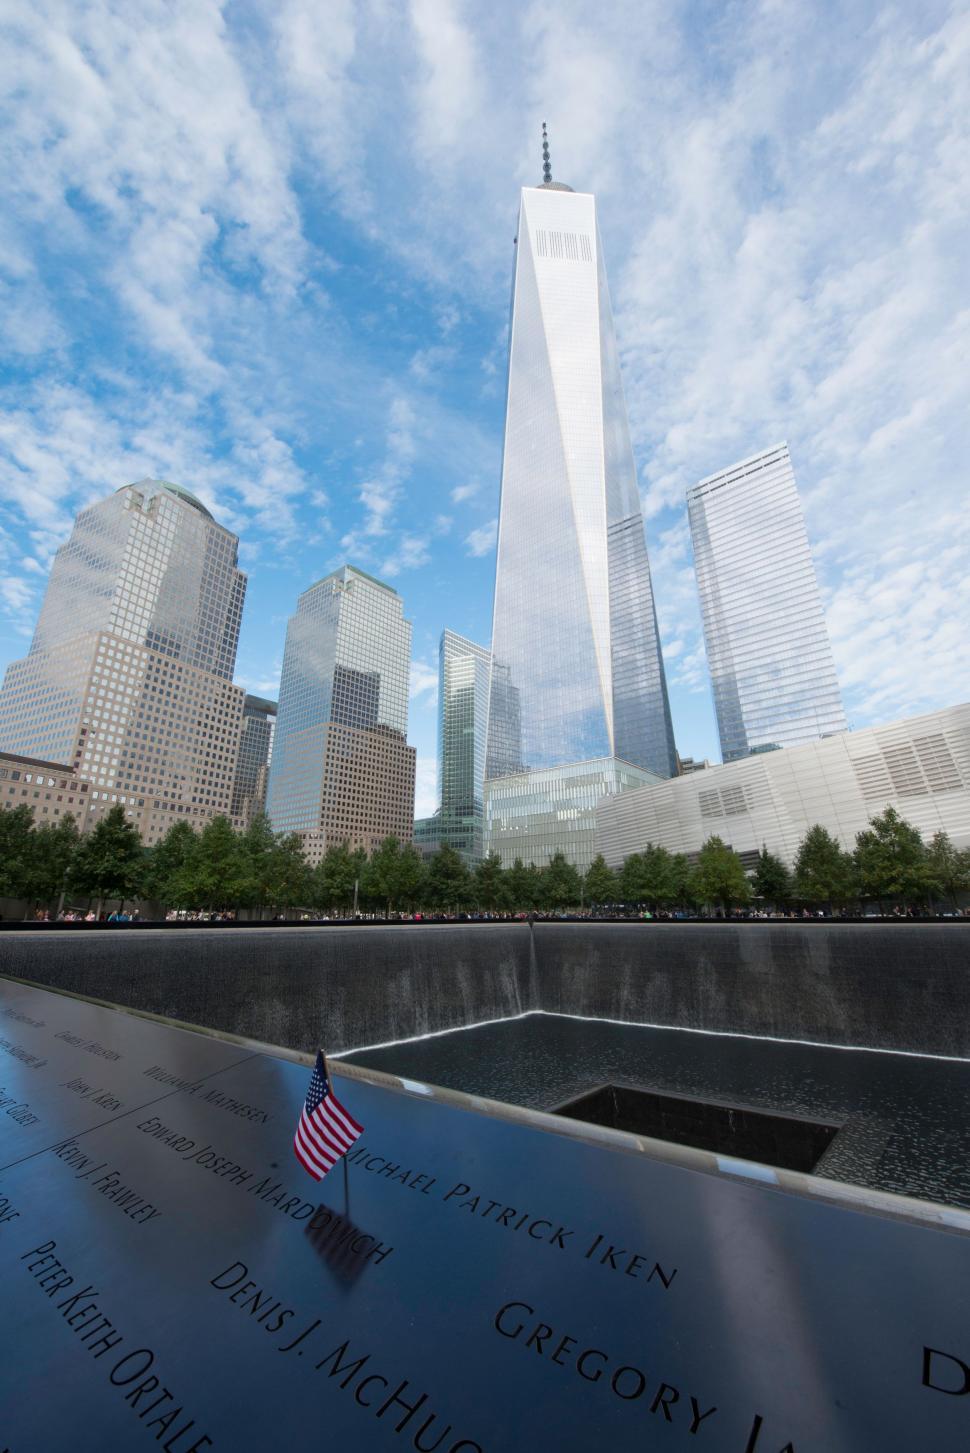 Free Image of A View of the World Trade Center in New York City 